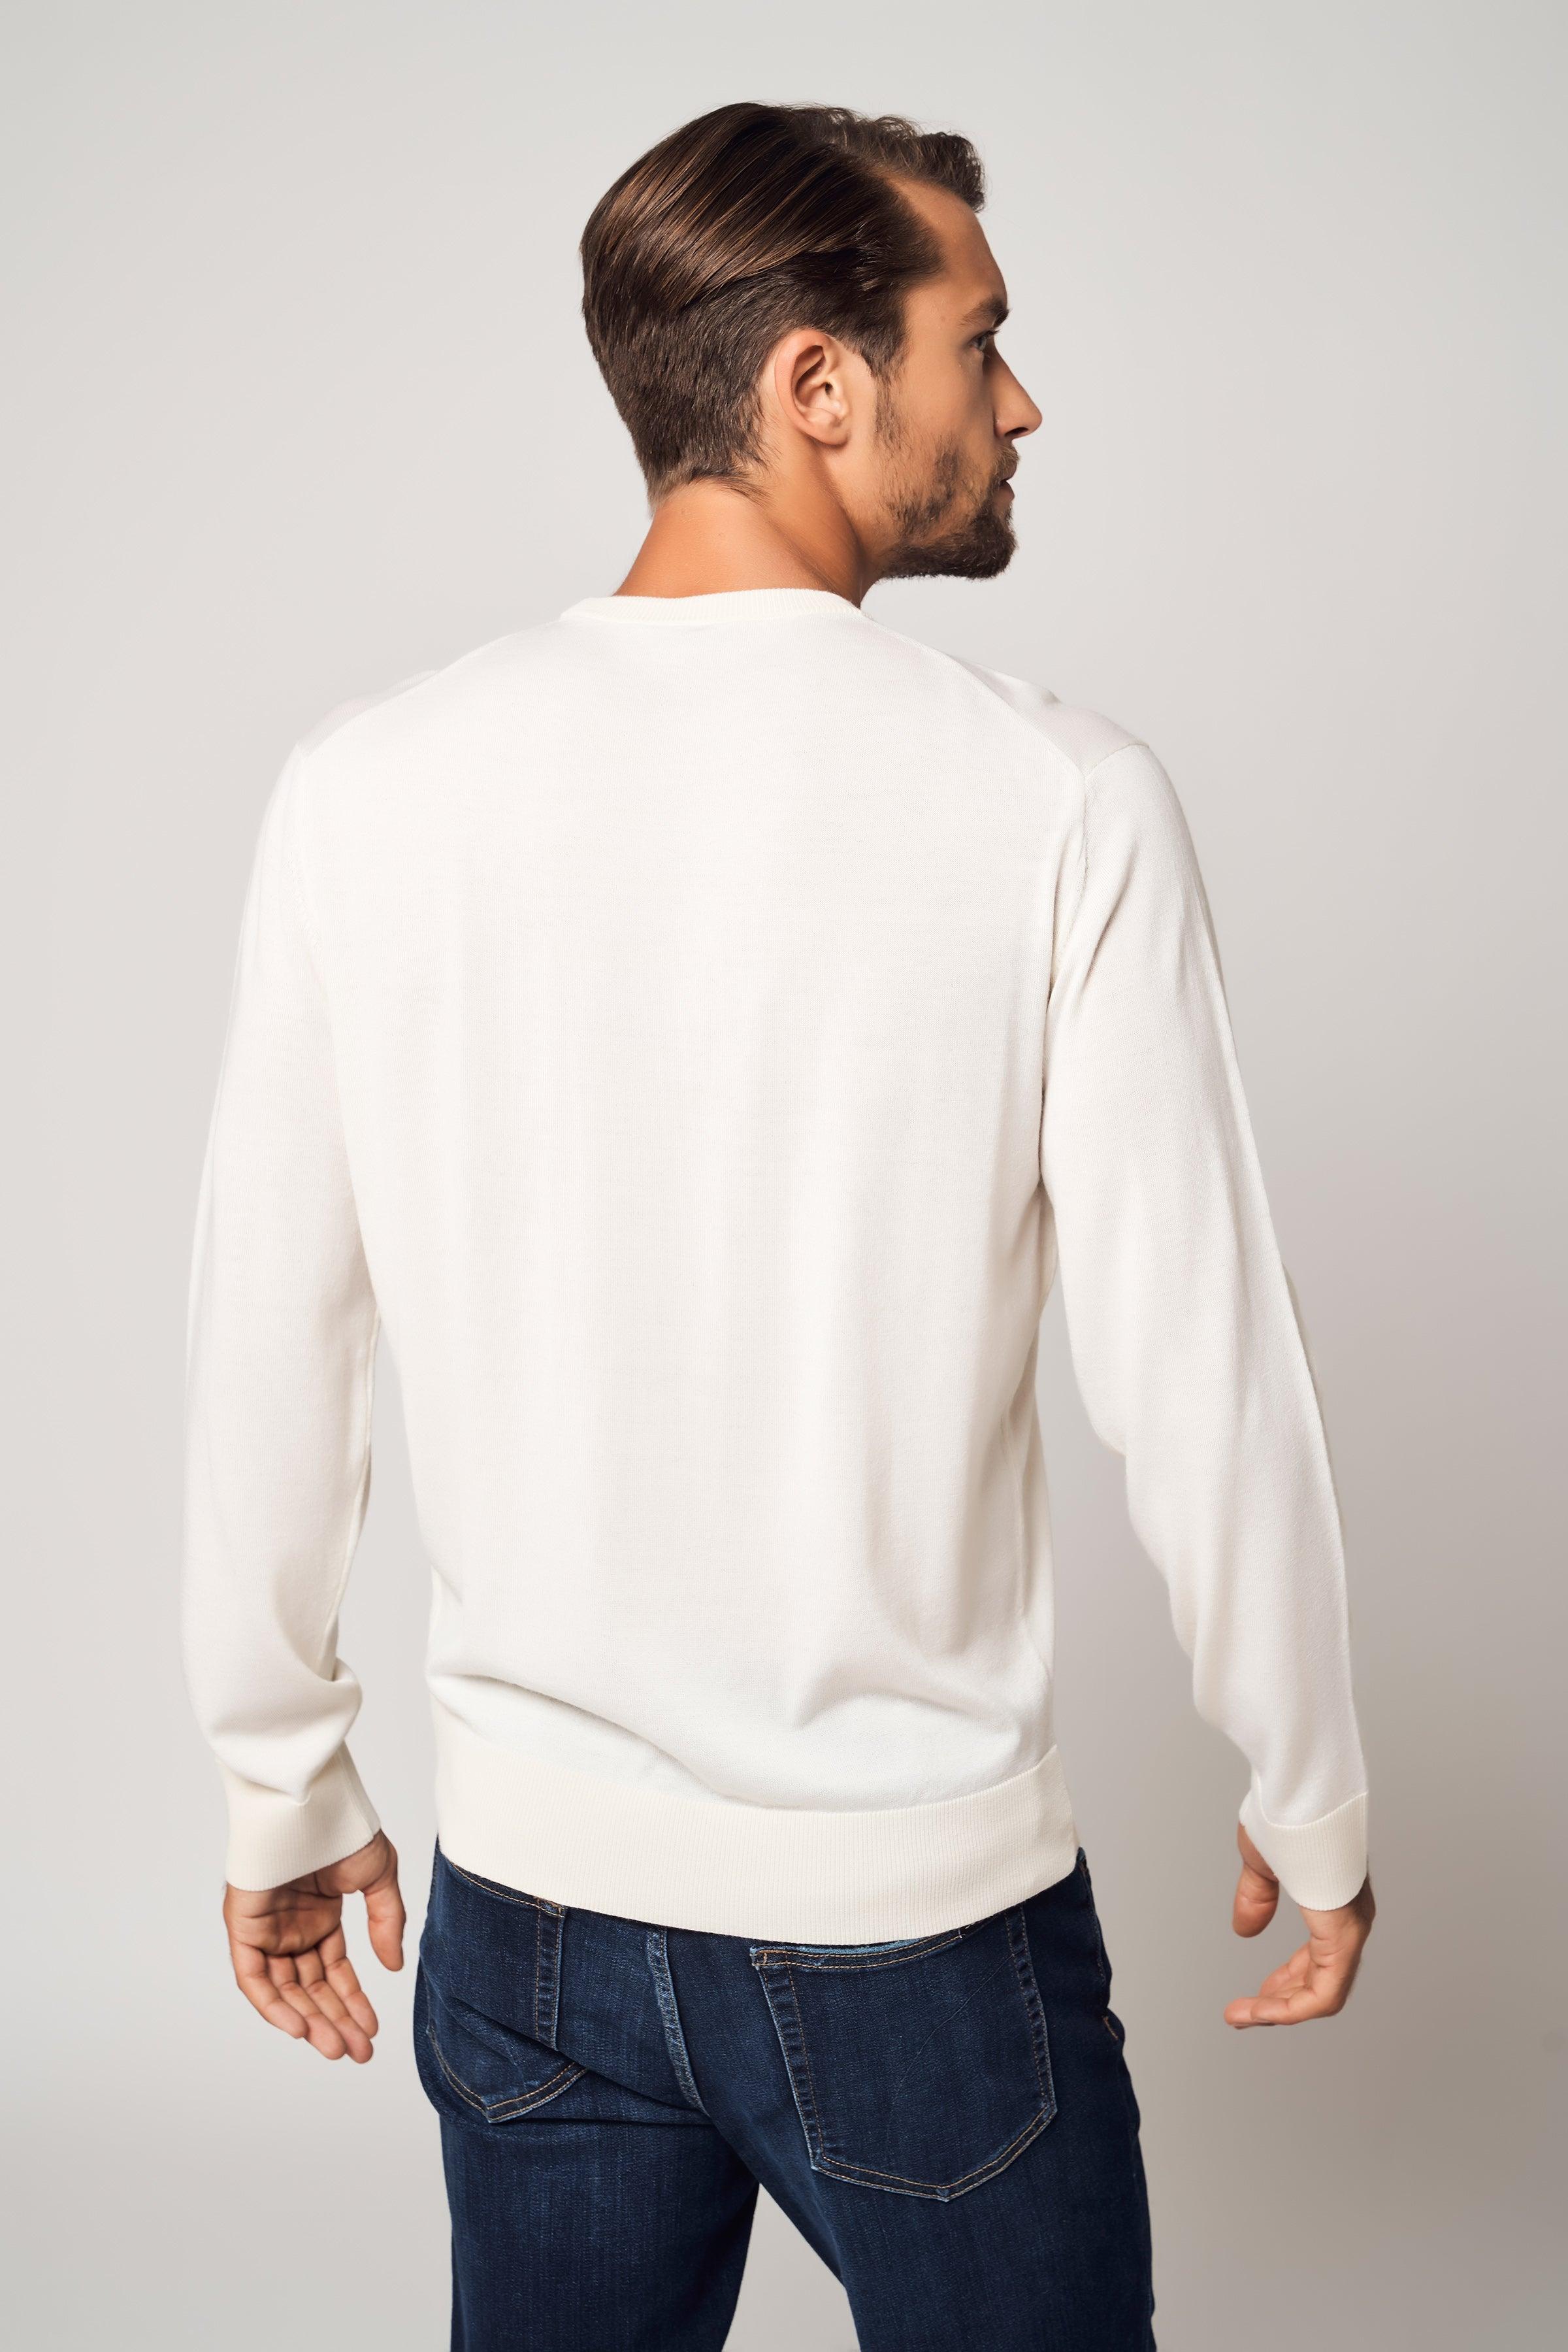 100% Worsted Cashmere Crew Neck Sweater